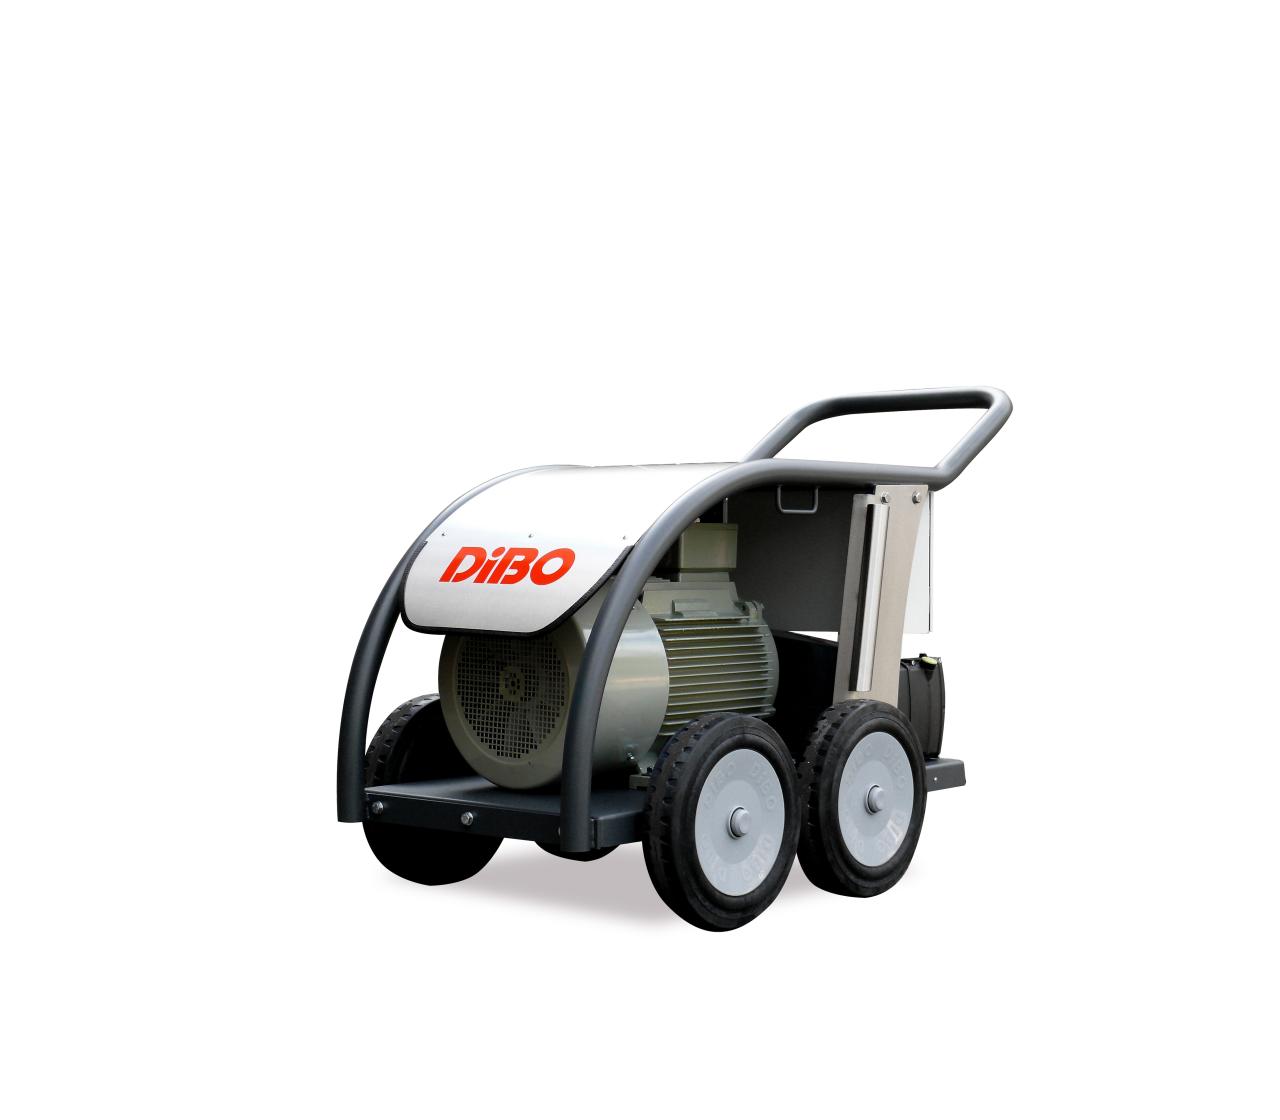 Industrial cold-water high-pressure cleaner for extreme cleaning tasks 500 to 1000 Bar-DiBO ECN-XL